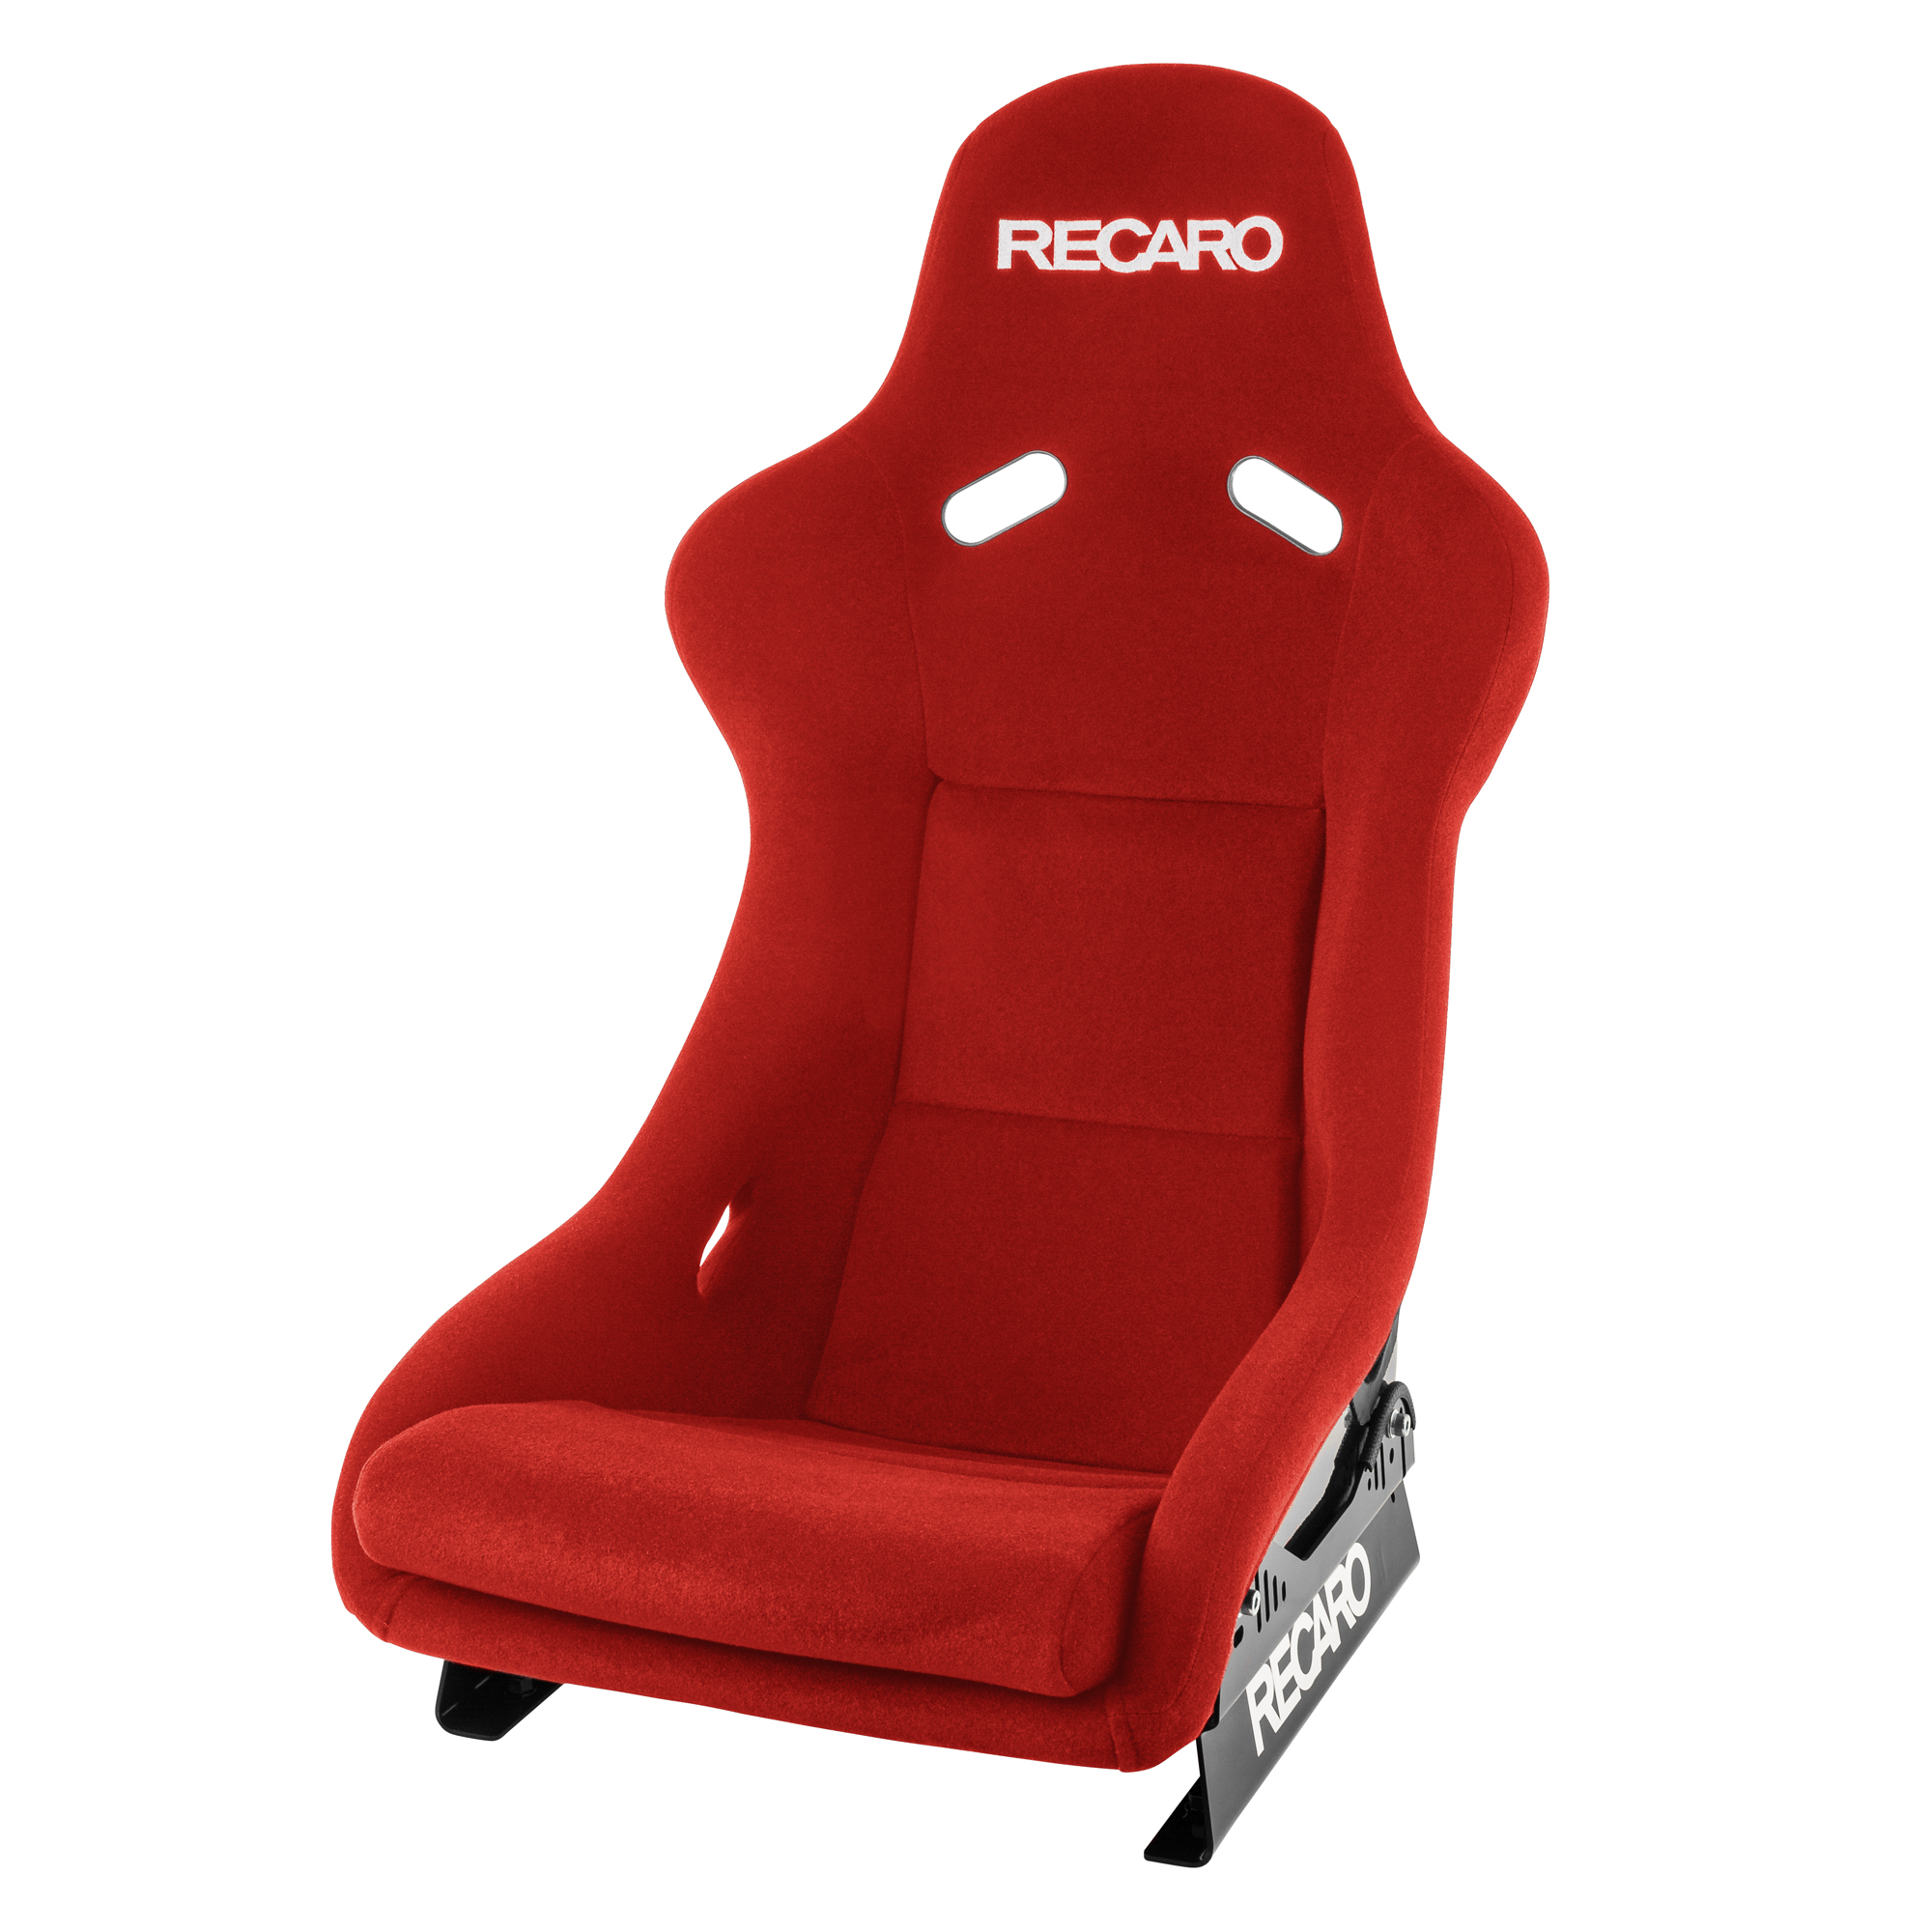 Recaro Pole Position Fibreglass FIA Approved Motorsport / Competition Seat  - Red